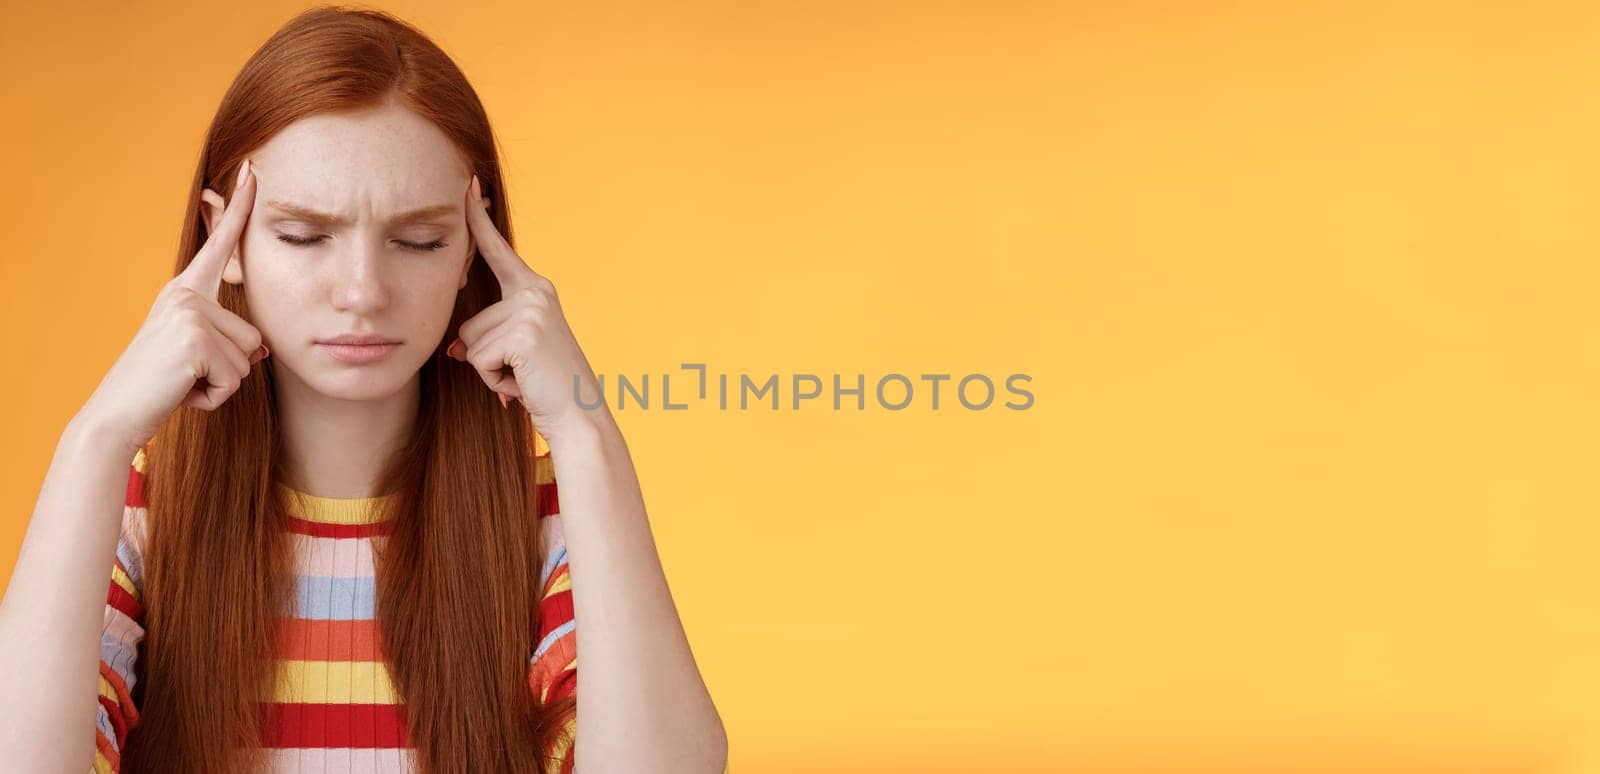 Girl getting thoughts piled trying think stright focusing concentrating important task remember number touch temples close eyes look seriously standing puzzled suffer headache, orange background by Benzoix